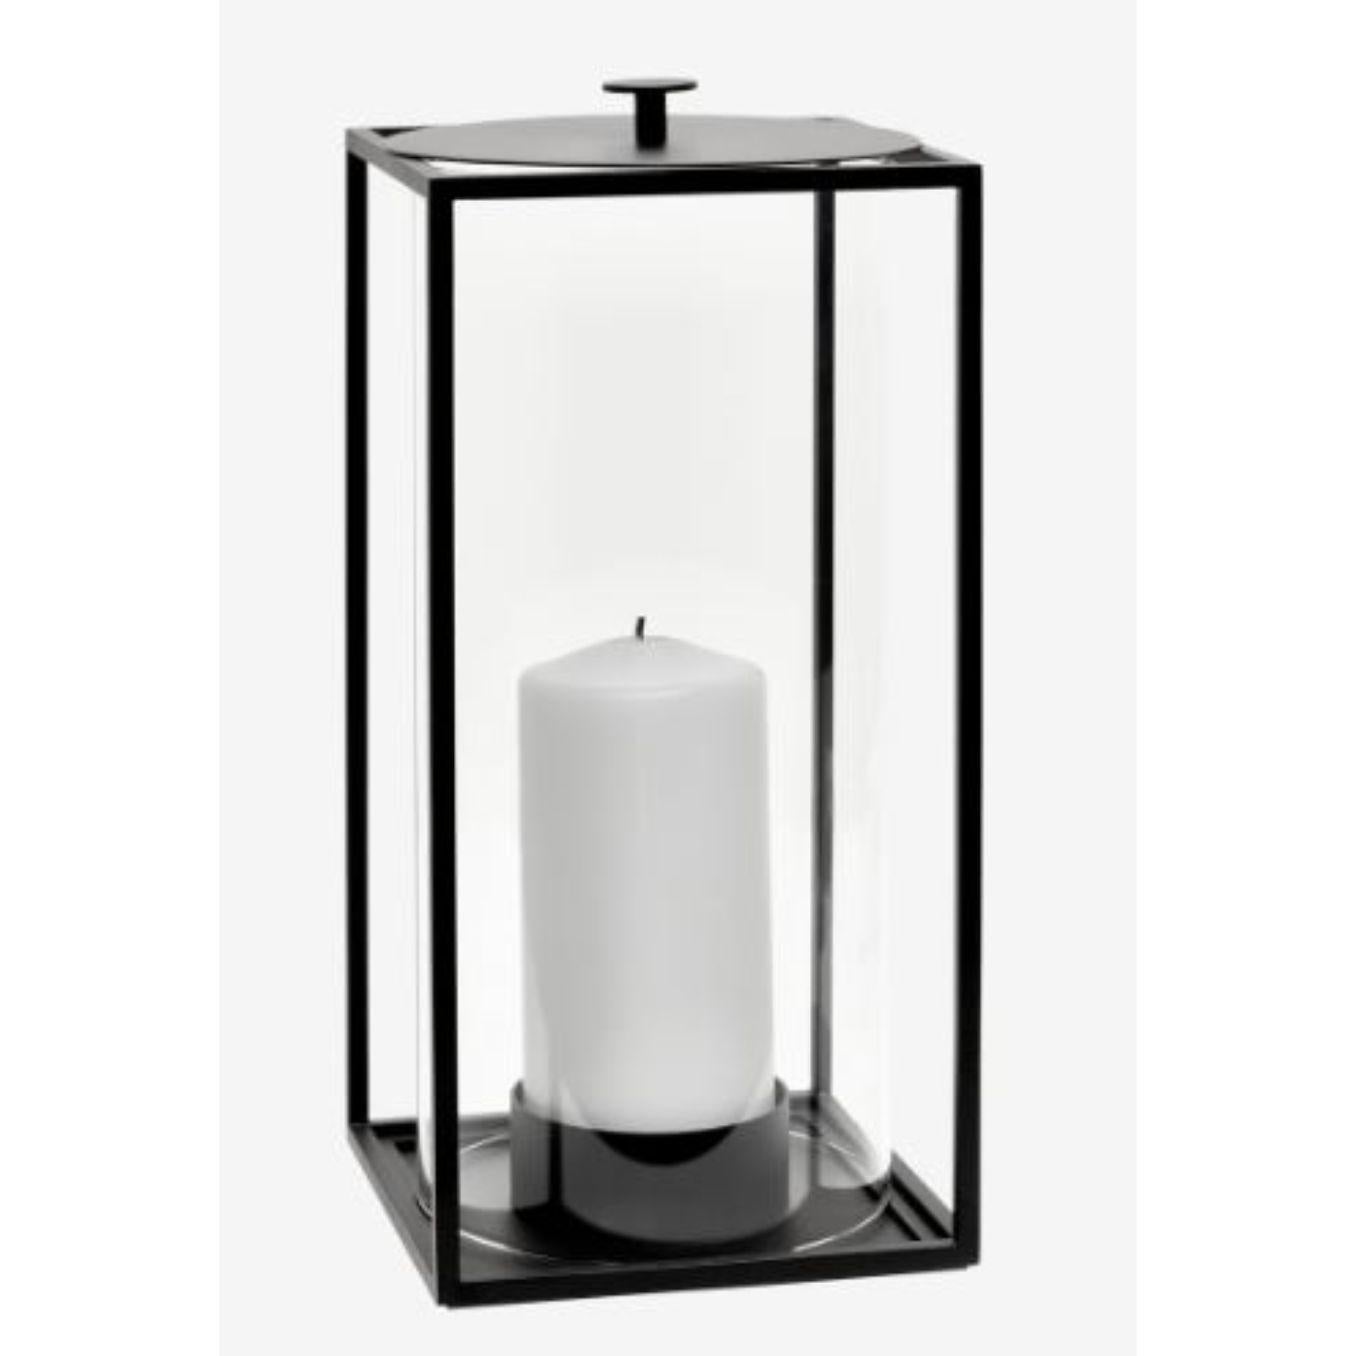 Large Light’In lantern by Lassen
Dimensions: D 14 x W 14 x H 28 cm 
Materials: Metal 
Also available in different dimensions. 
Weight: 2.00 Kg

With a sharp sense of contemporary Functionalist style, Mogens Lassen designed the iconic Kubus